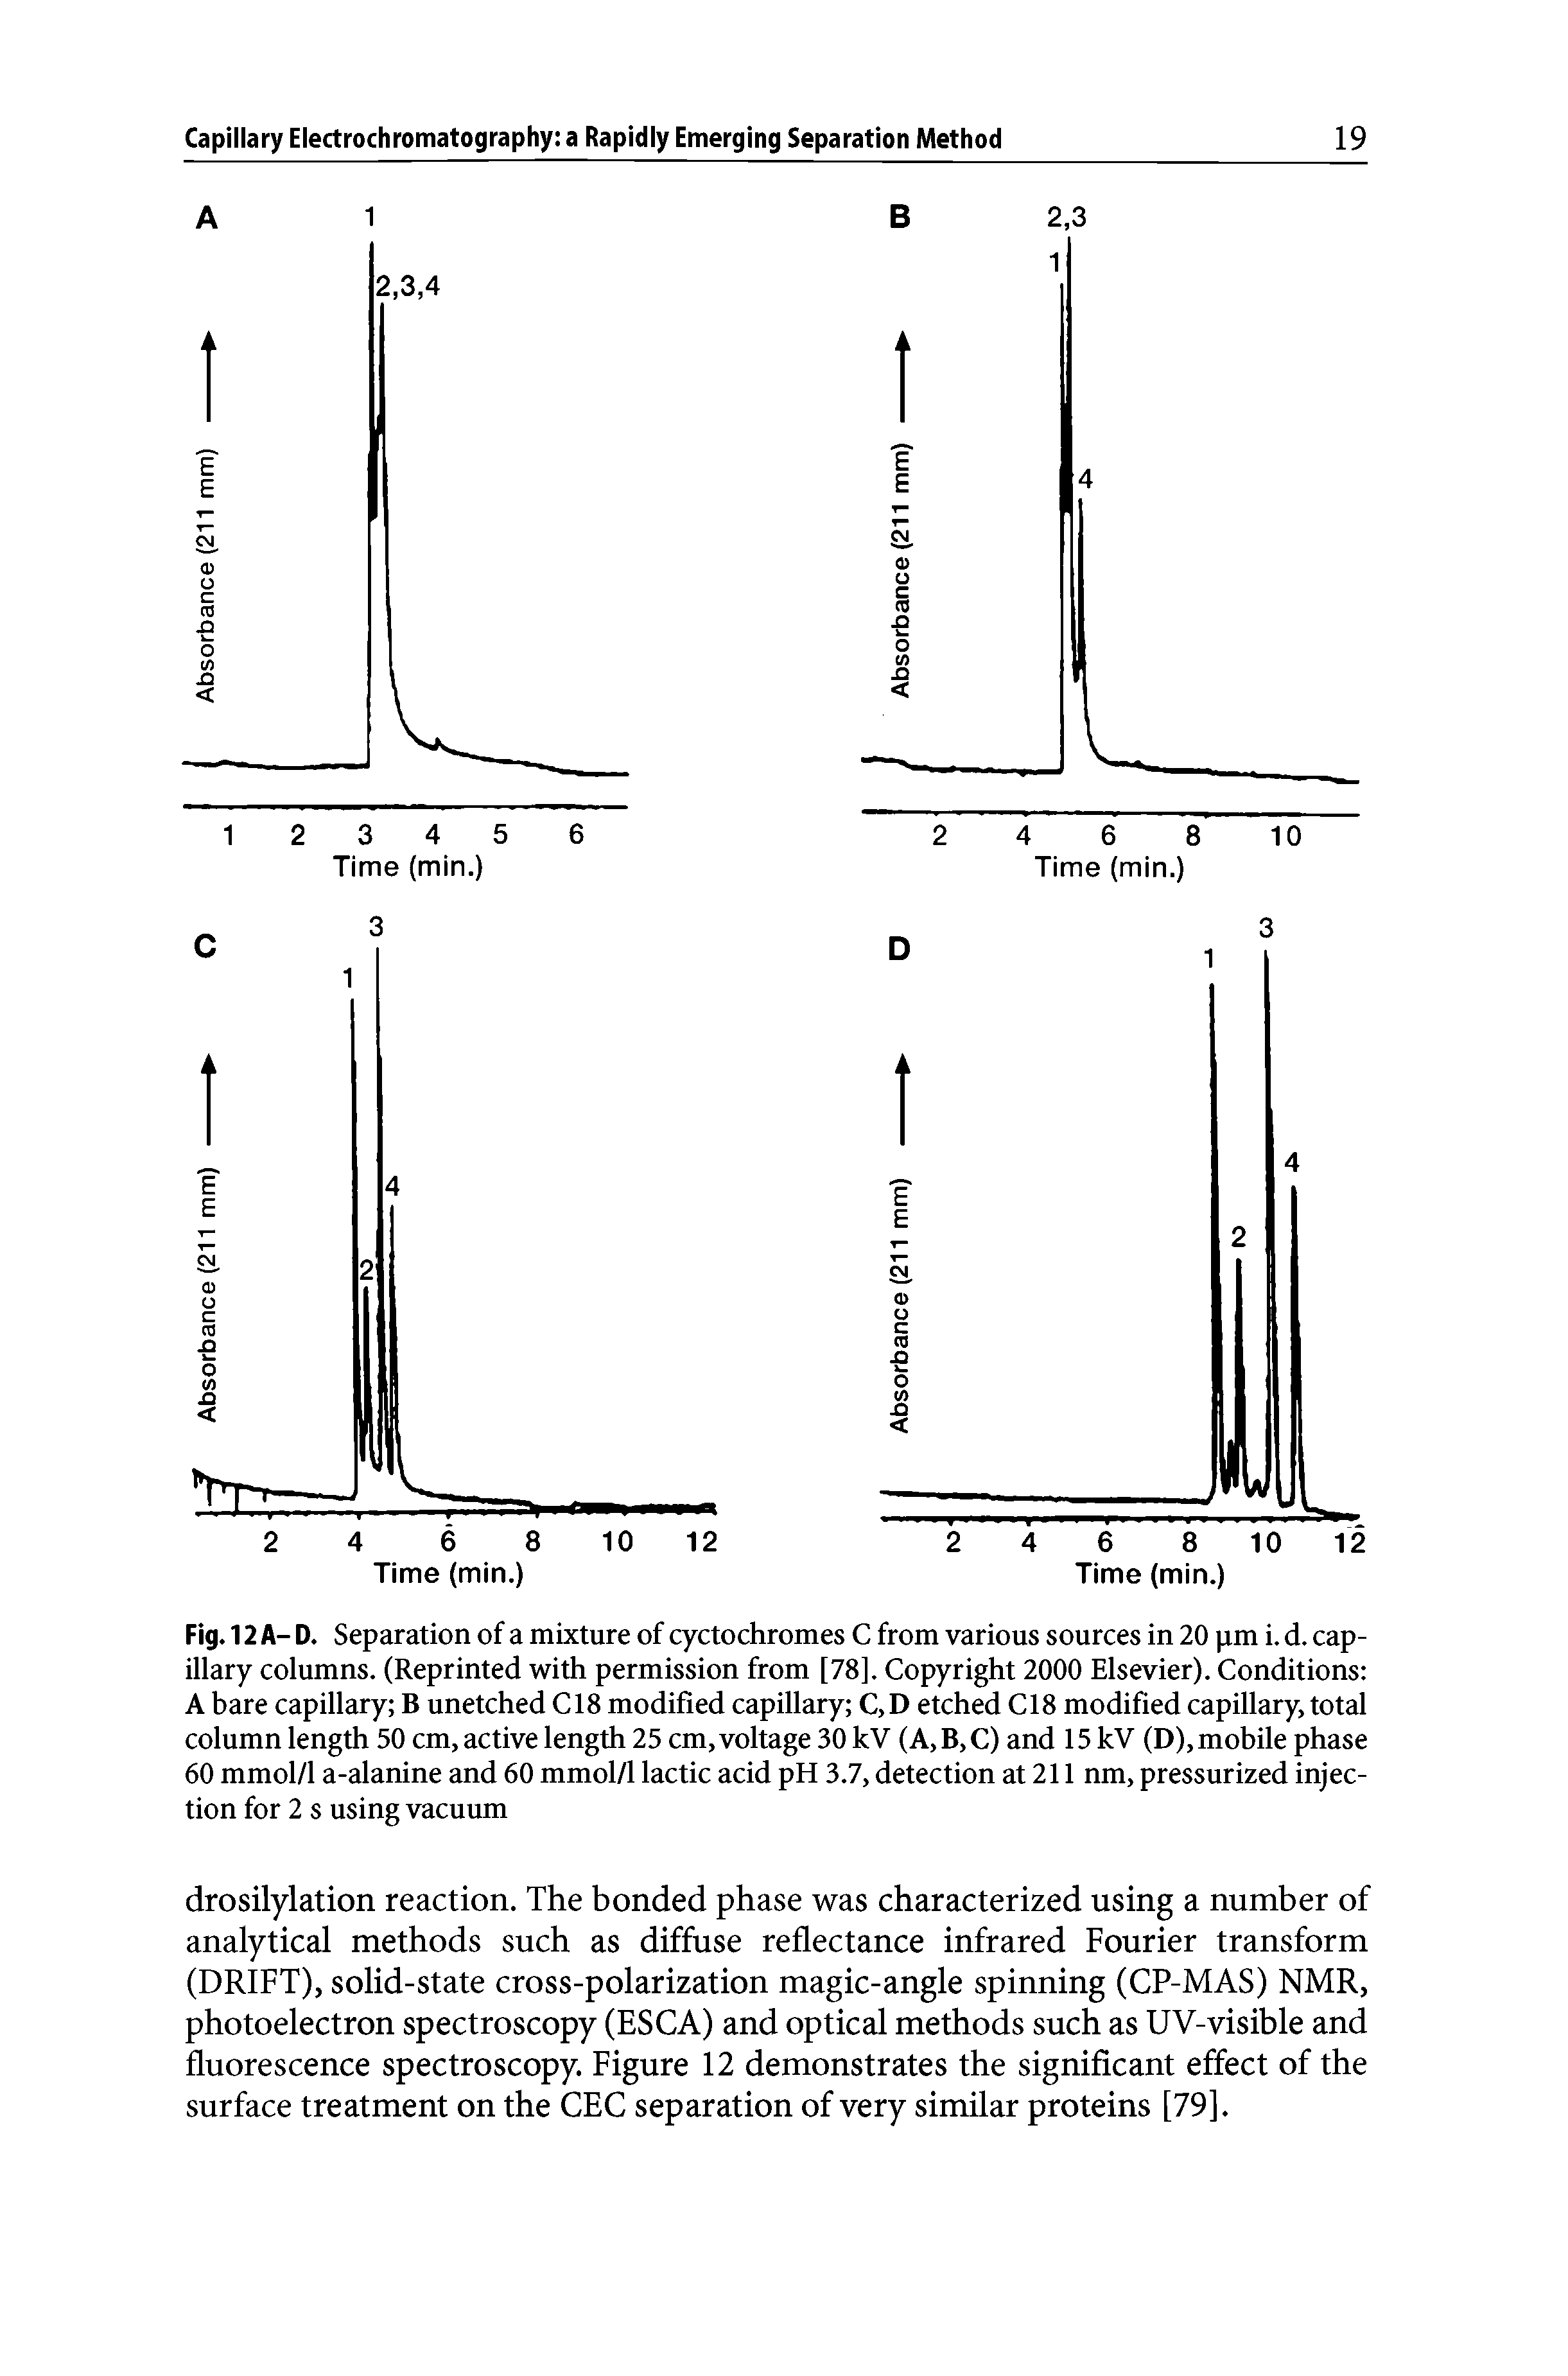 Fig. 12 A- D. Separation of a mixture of cyctochromes C from various sources in 20 pm i. d. capillary columns. (Reprinted with permission from [78]. Copyright 2000 Elsevier). Conditions A bare capillary B unetched C18 modified capillary C,D etched C18 modified capillary, total column length 50 cm, active length 25 cm, voltage 30 kV (A,B,C) and 15 kV (D), mobile phase 60 mmol/1 a-alanine and 60 mmol/1 lactic acid pH 3.7, detection at 211 nm, pressurized injection for 2 s using vacuum...